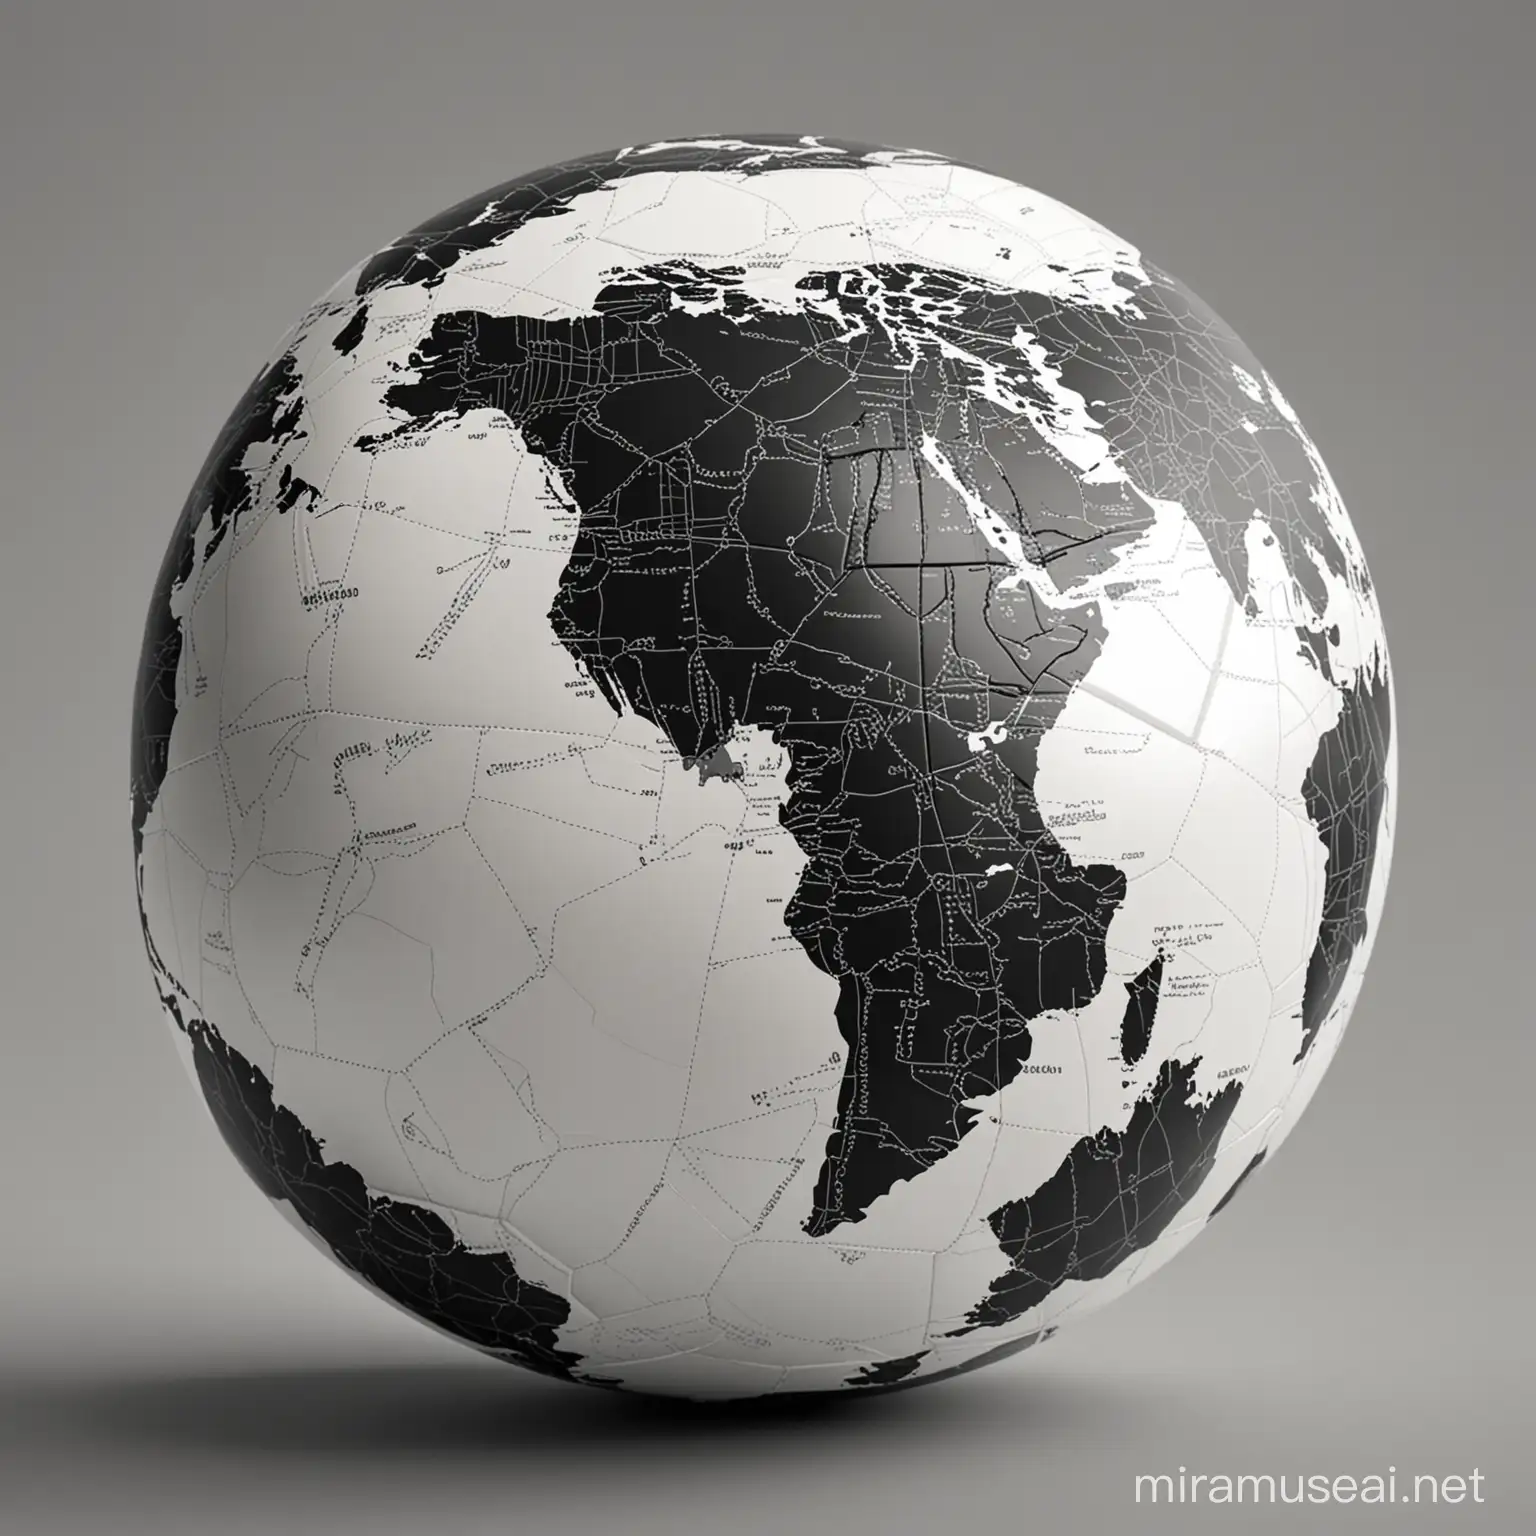 soccerball with black map of the world pattern on it